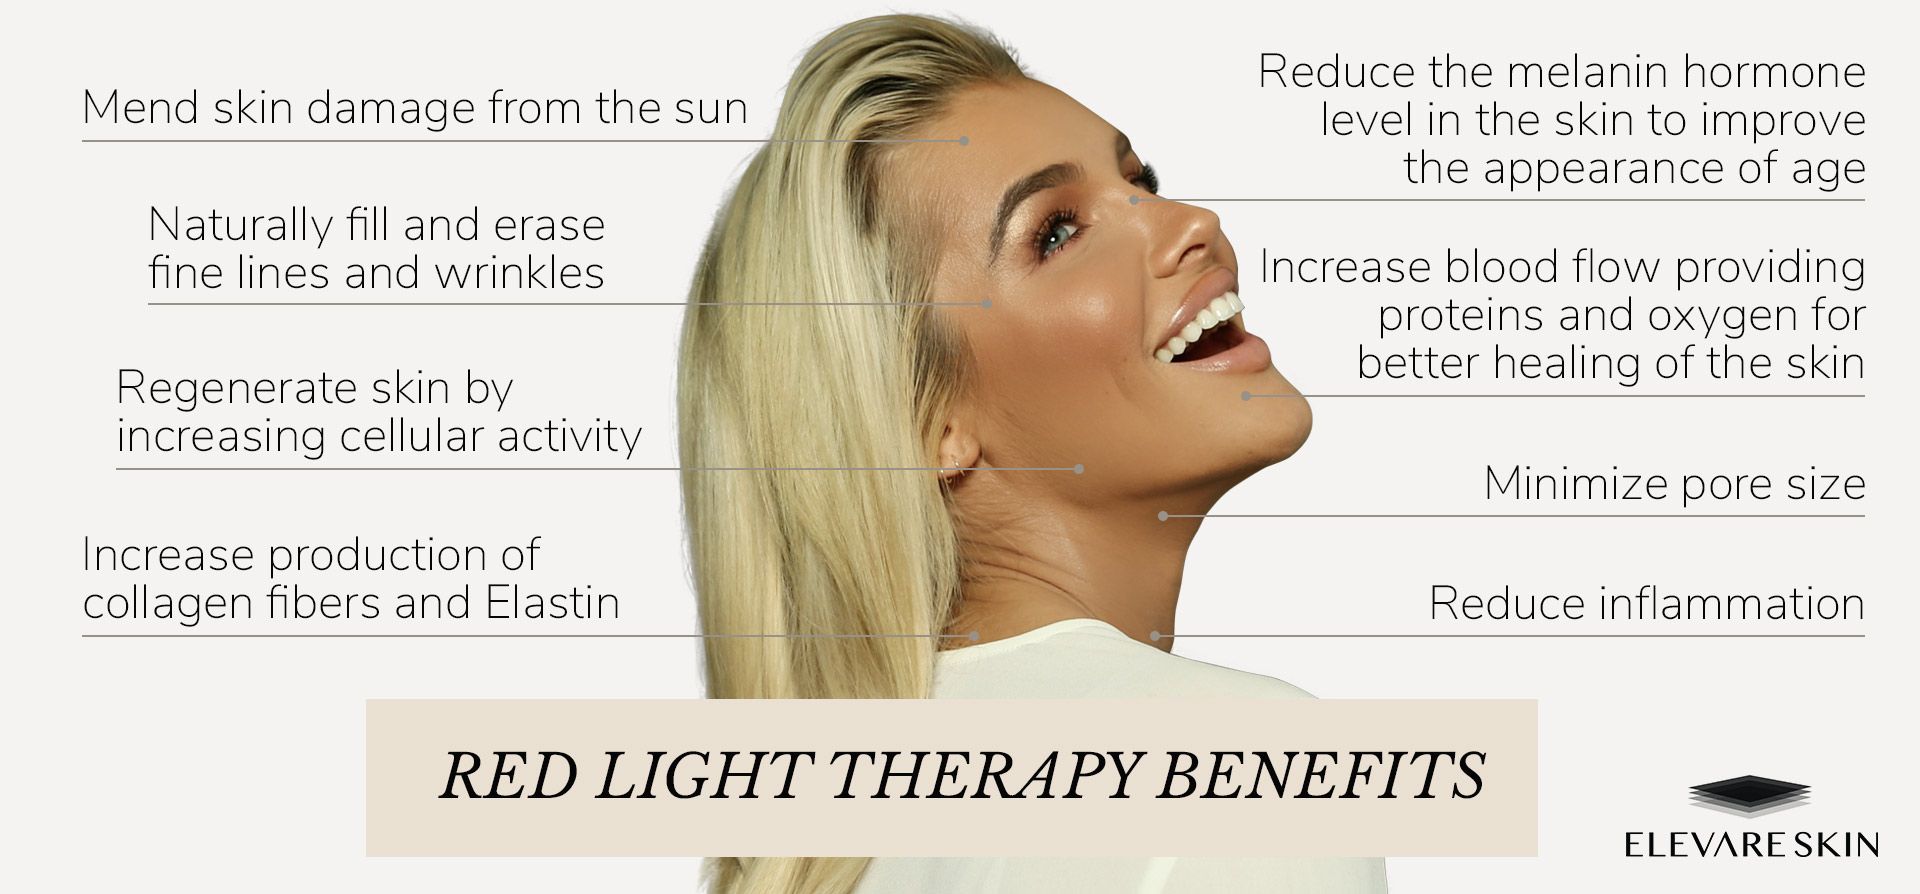 The Elevare Plus offers many benefits from Red Light Therapy